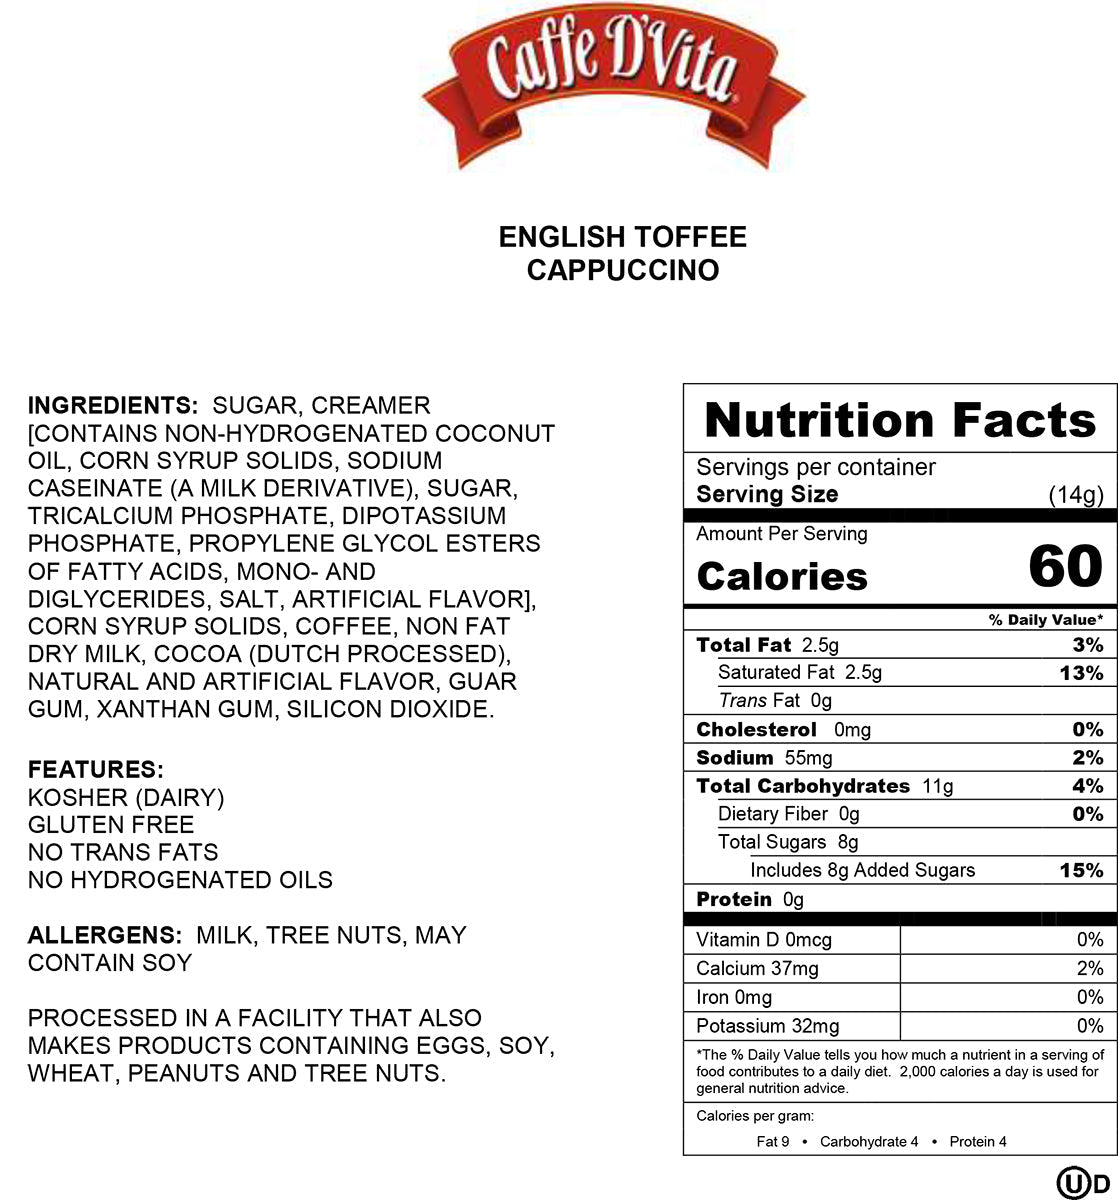 English Toffee Cappuccino - Case of 6 - 1 lb. cans (16 oz.) - caffedvita